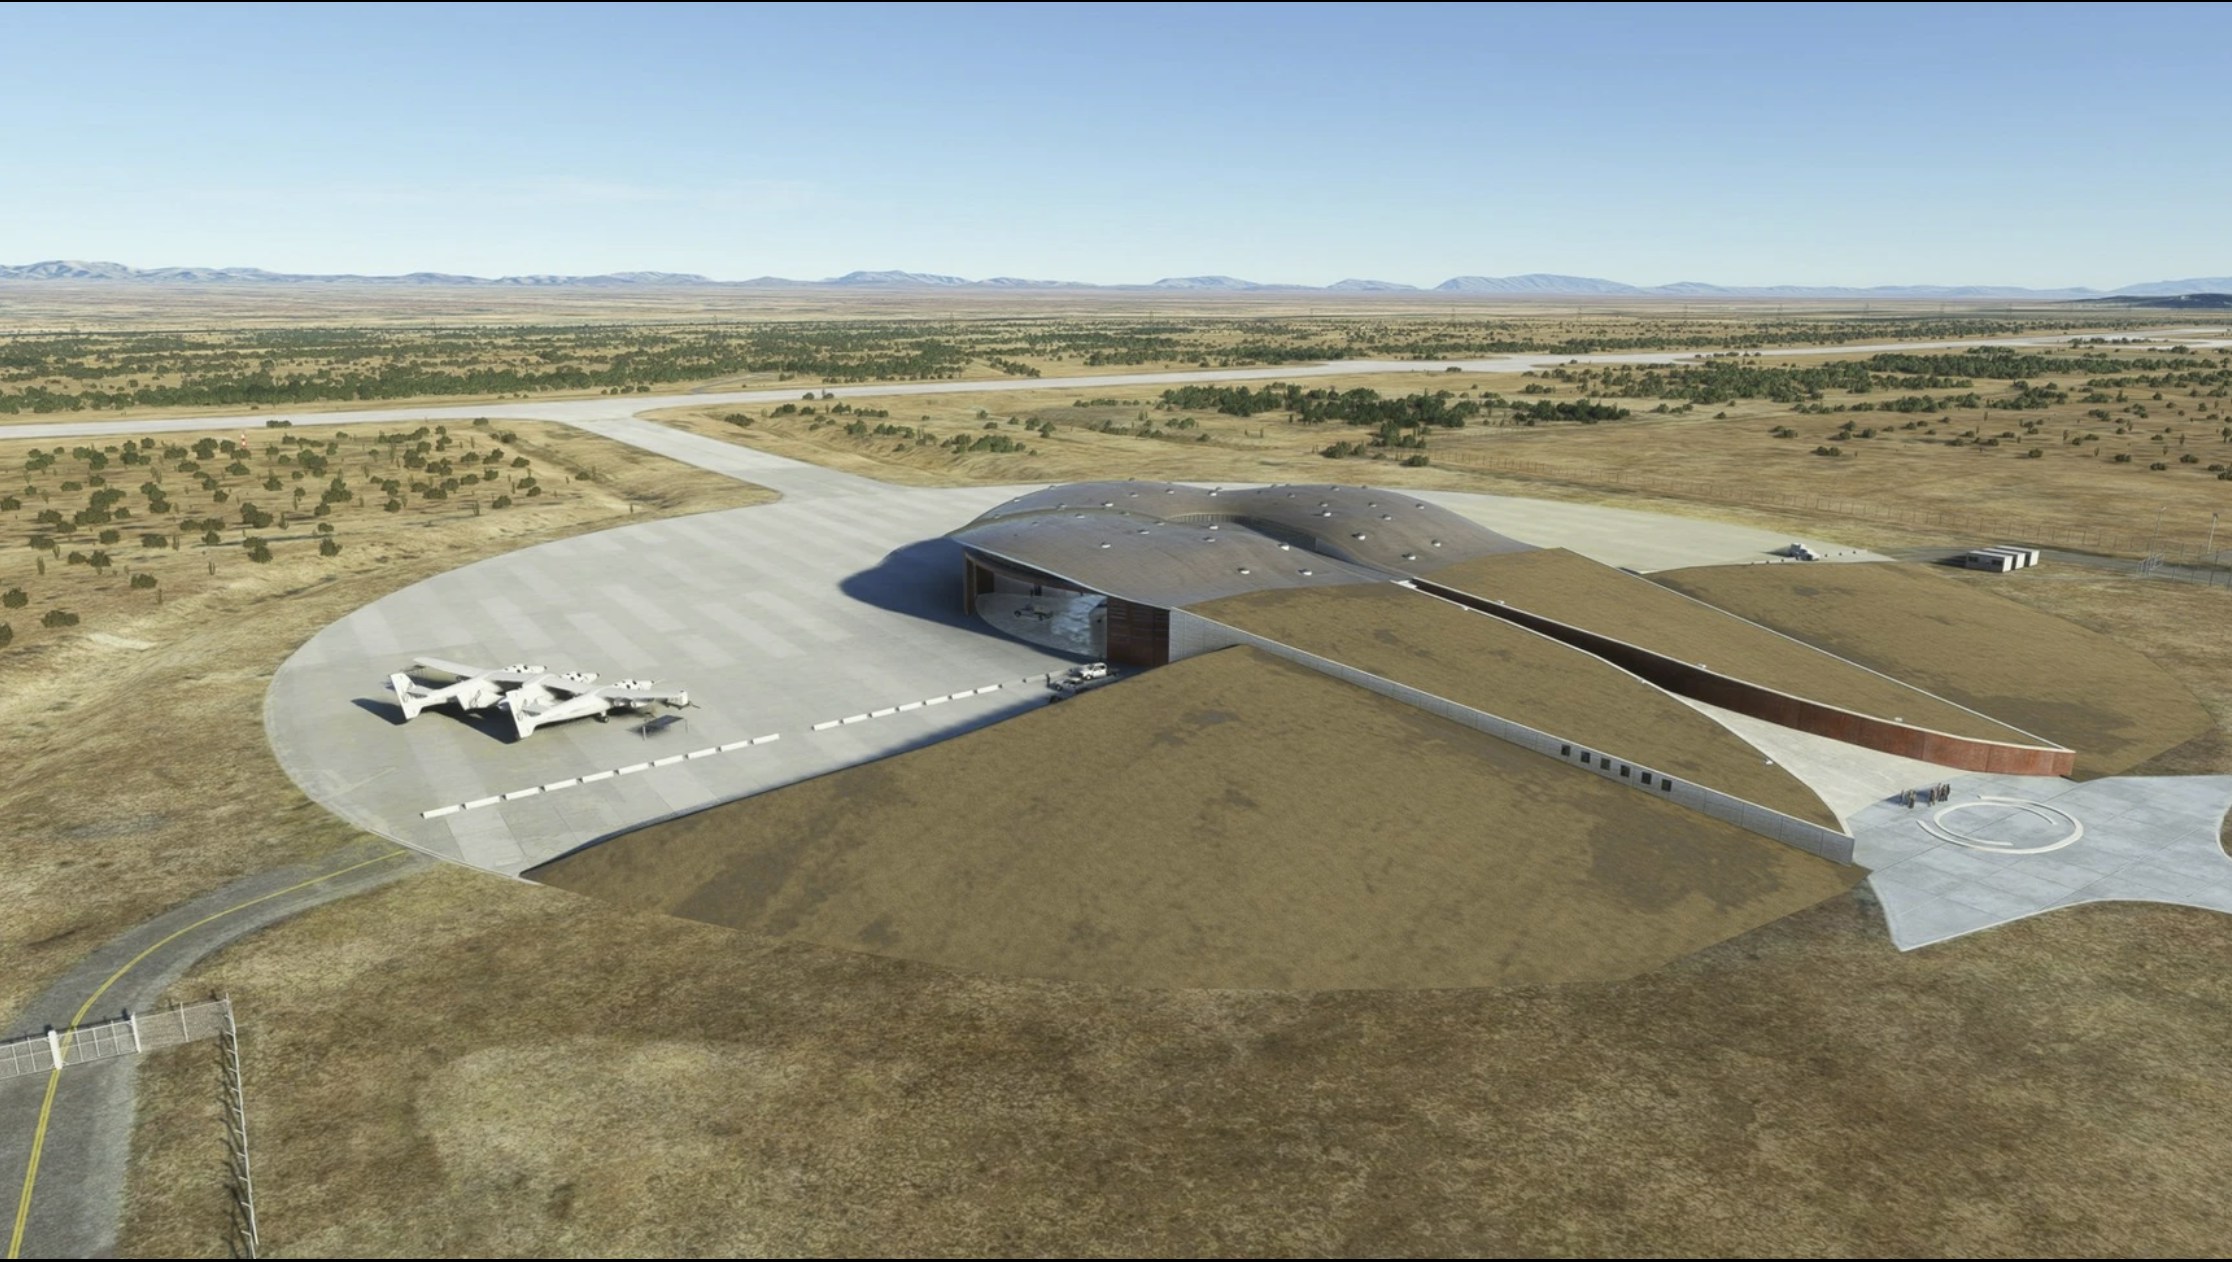 UK2000 publishes Spaceport America for MSFS